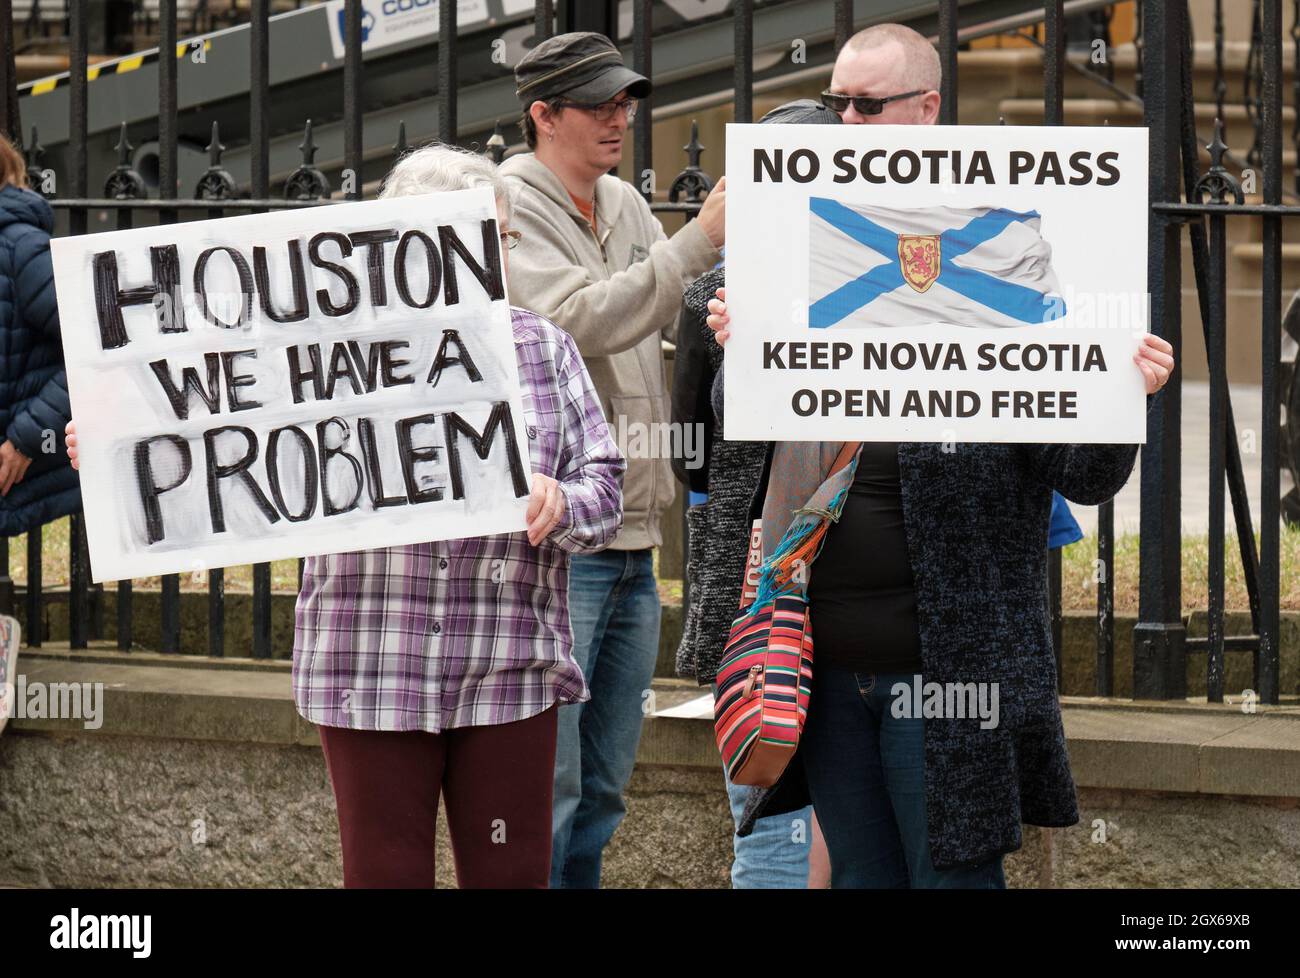 Halifax, Nova Scotia, Canada. October 4, 2021. Group of people gathered in front of the Provincial Legislature to protest the first day of the provincial vaccine mandate. The so called “Scotia Pass”, comes into force today requiring individuals to show proof of vaccination, in order to participate in non-essential events and activities that gather people together, such as going to restaurants, sports events, social events, and the gym. In next phase, most public employees will be required to show proof at their place of employment by November 30th. Stock Photo